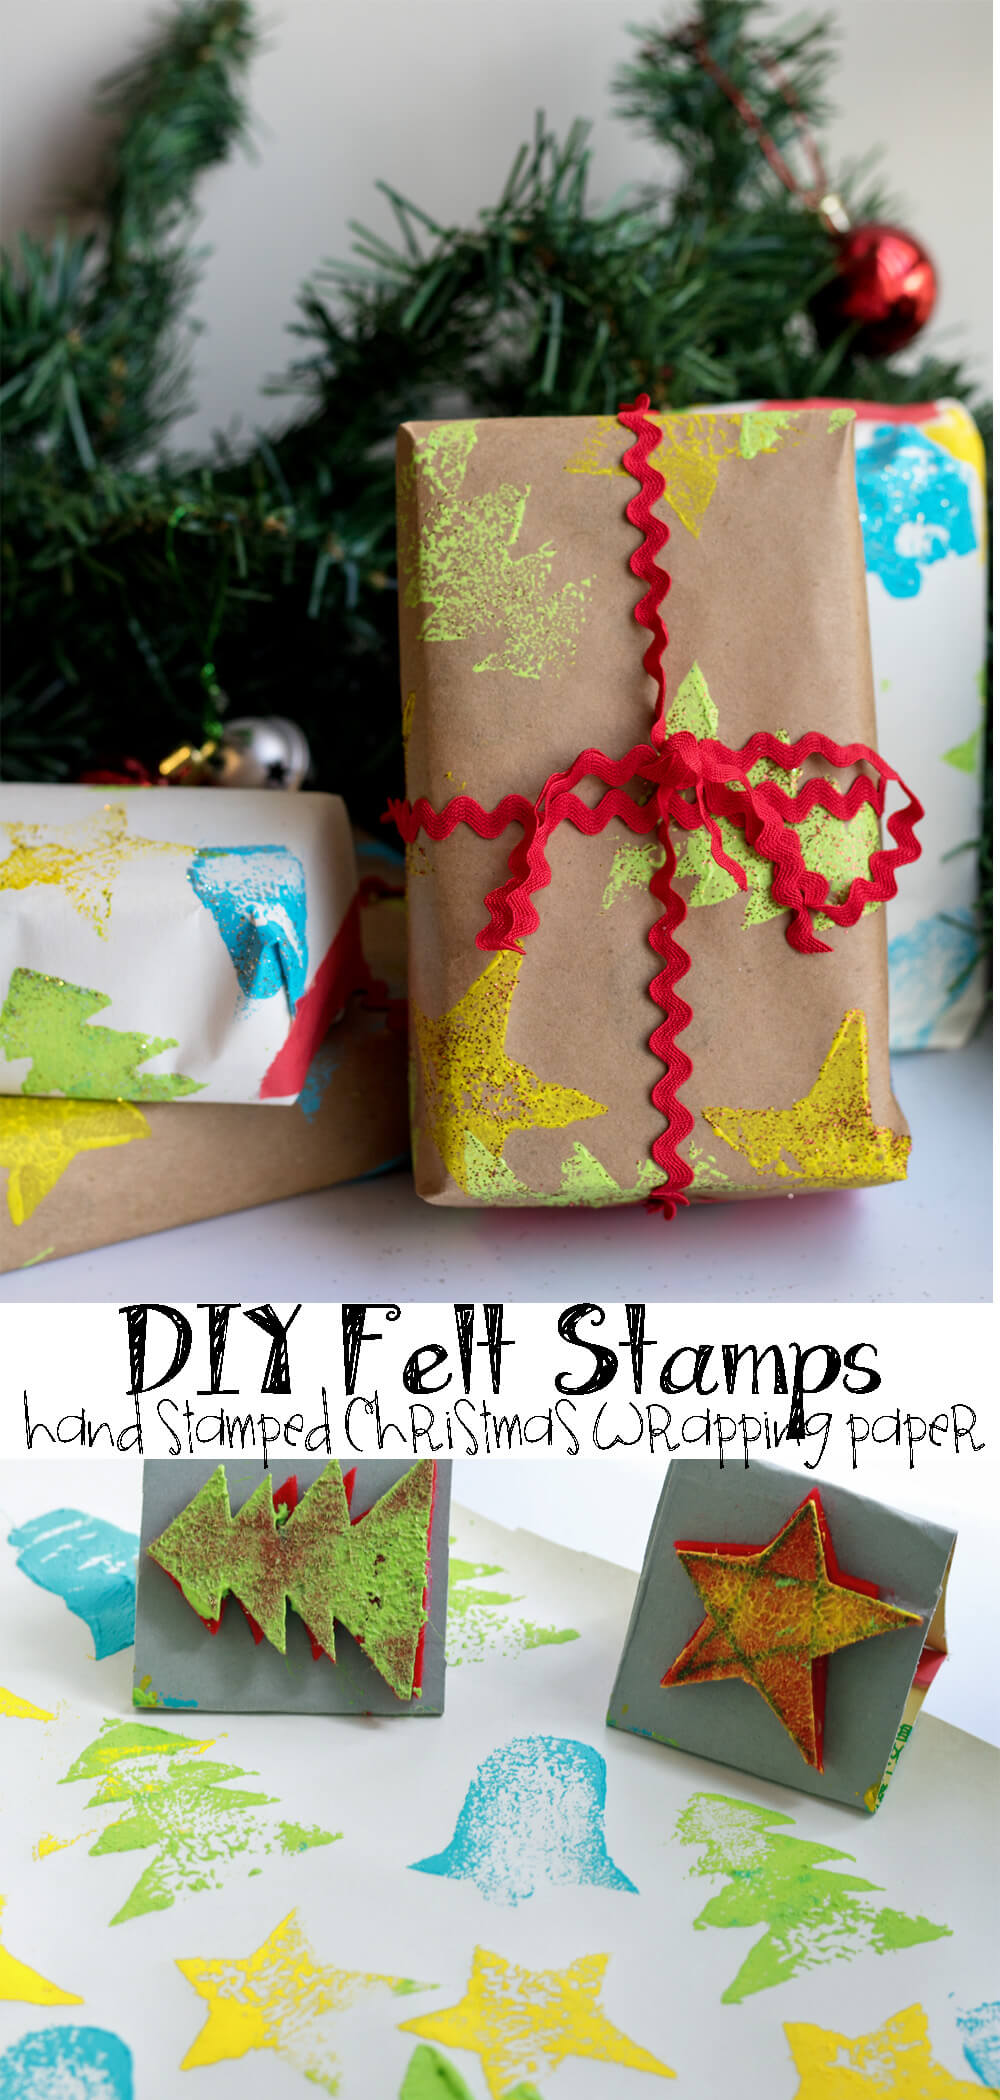 DIY Felt Stamps for Hand Stamped Christmas Wrapping Paper from Nap-Time Creations